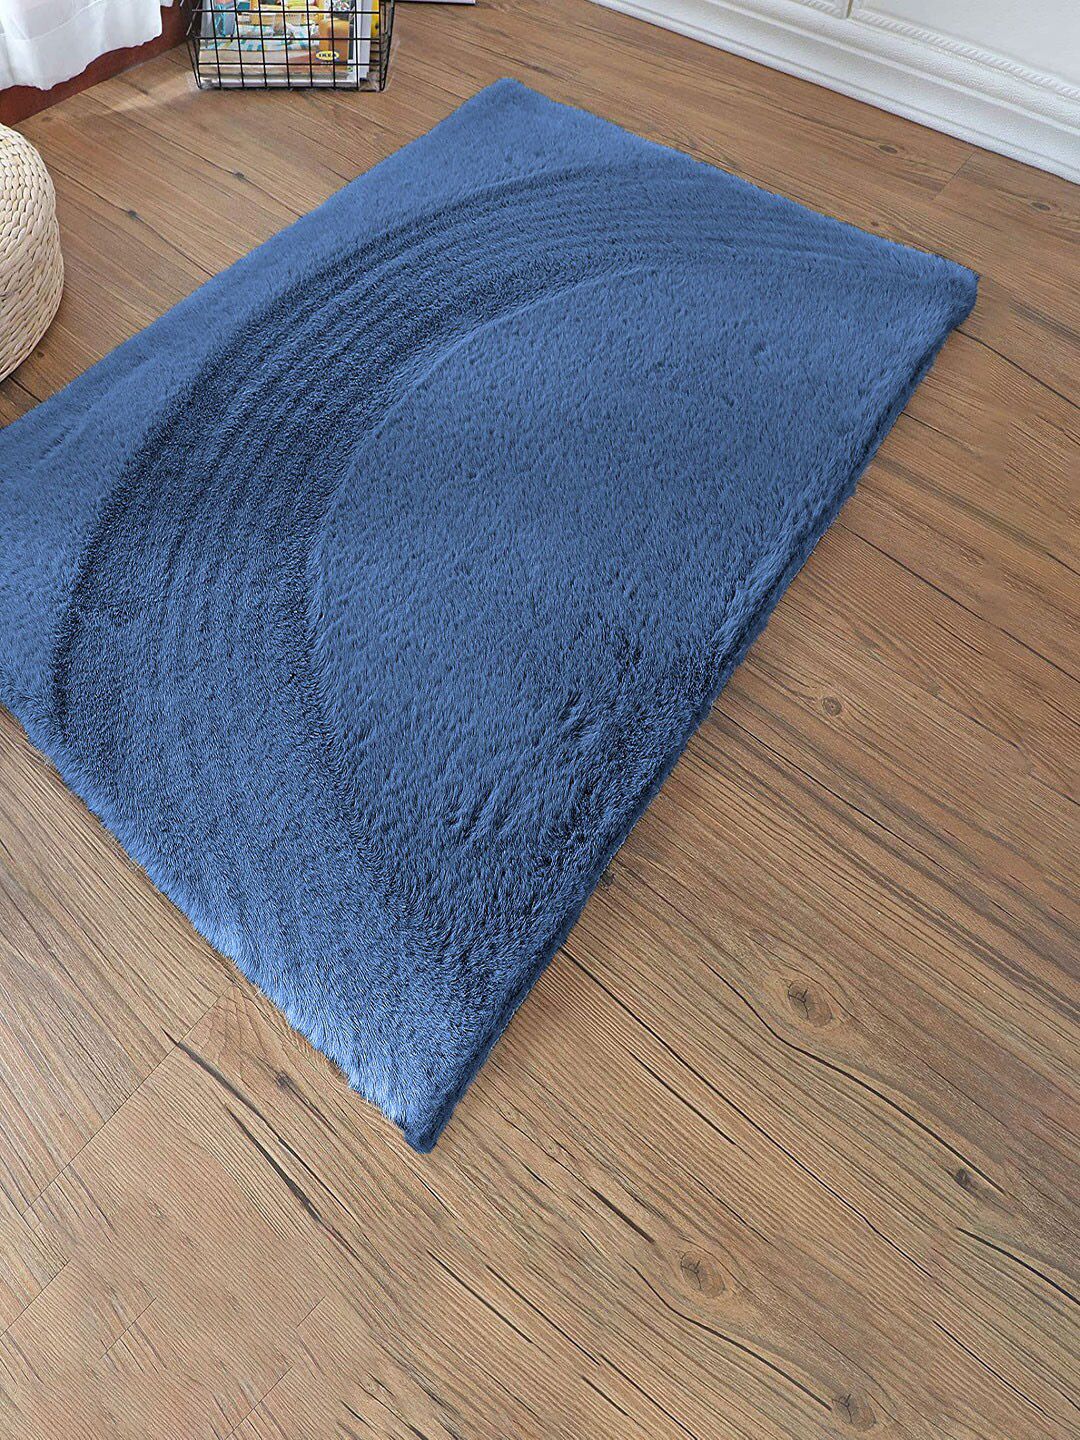 LUXEHOME INTERNATIONAL Blue Anti-Skid Doormats Price in India